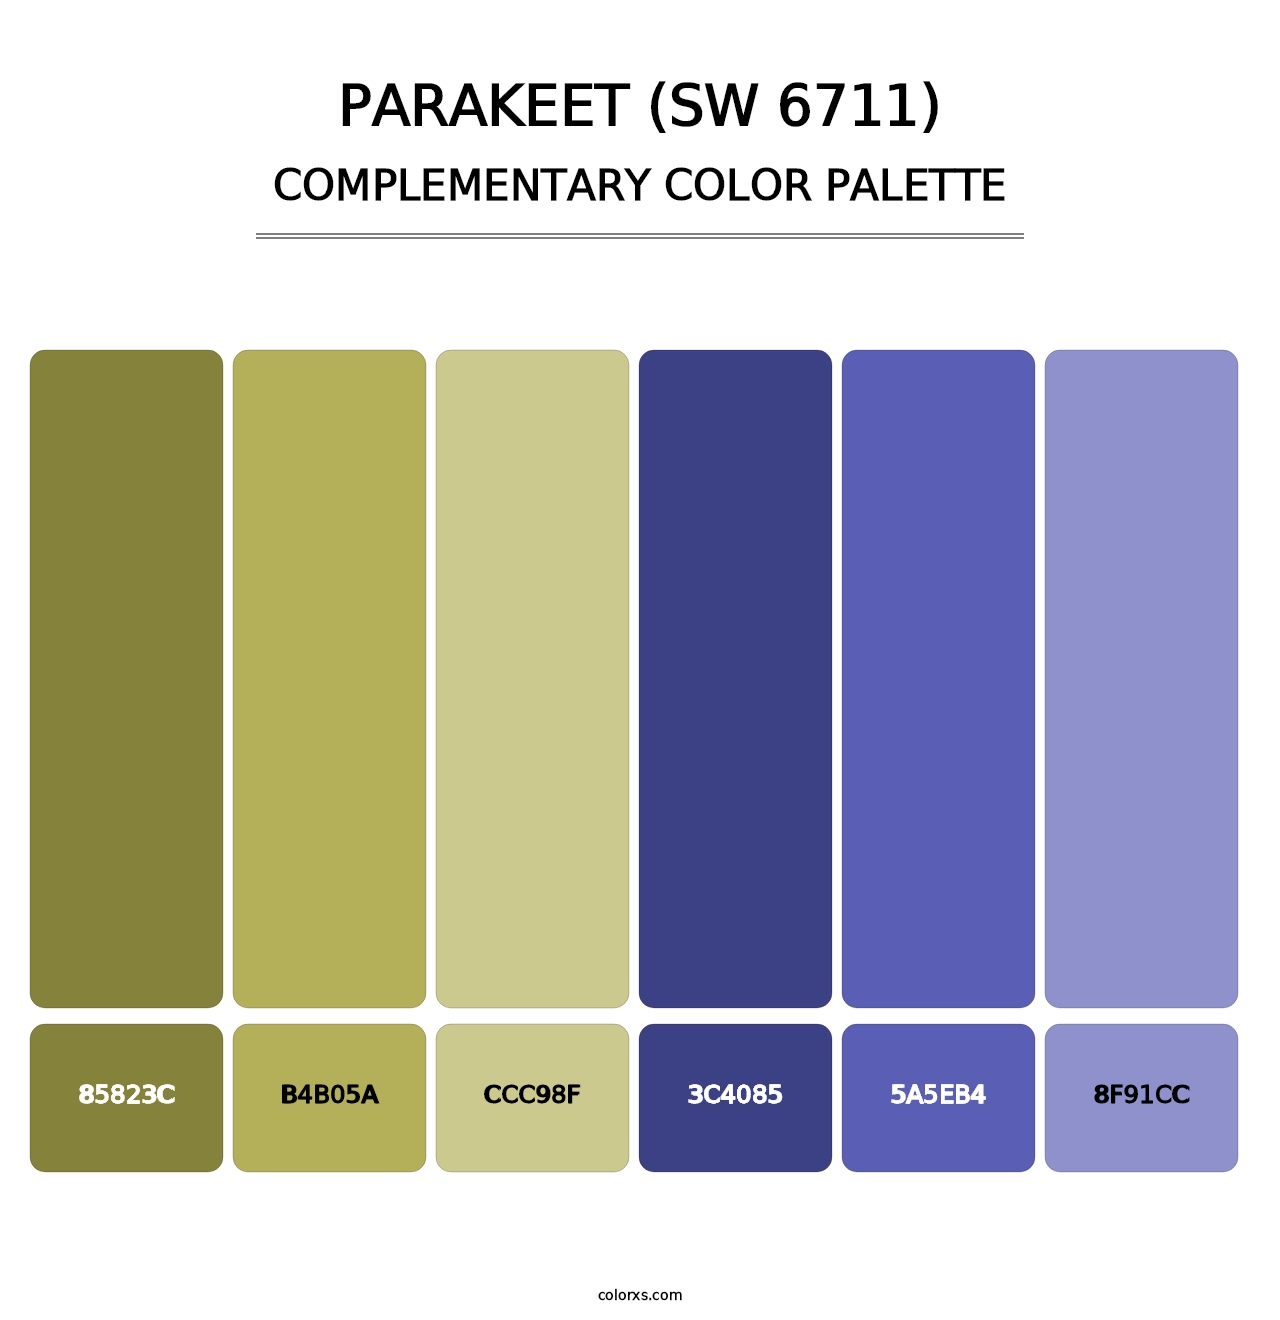 Parakeet (SW 6711) - Complementary Color Palette